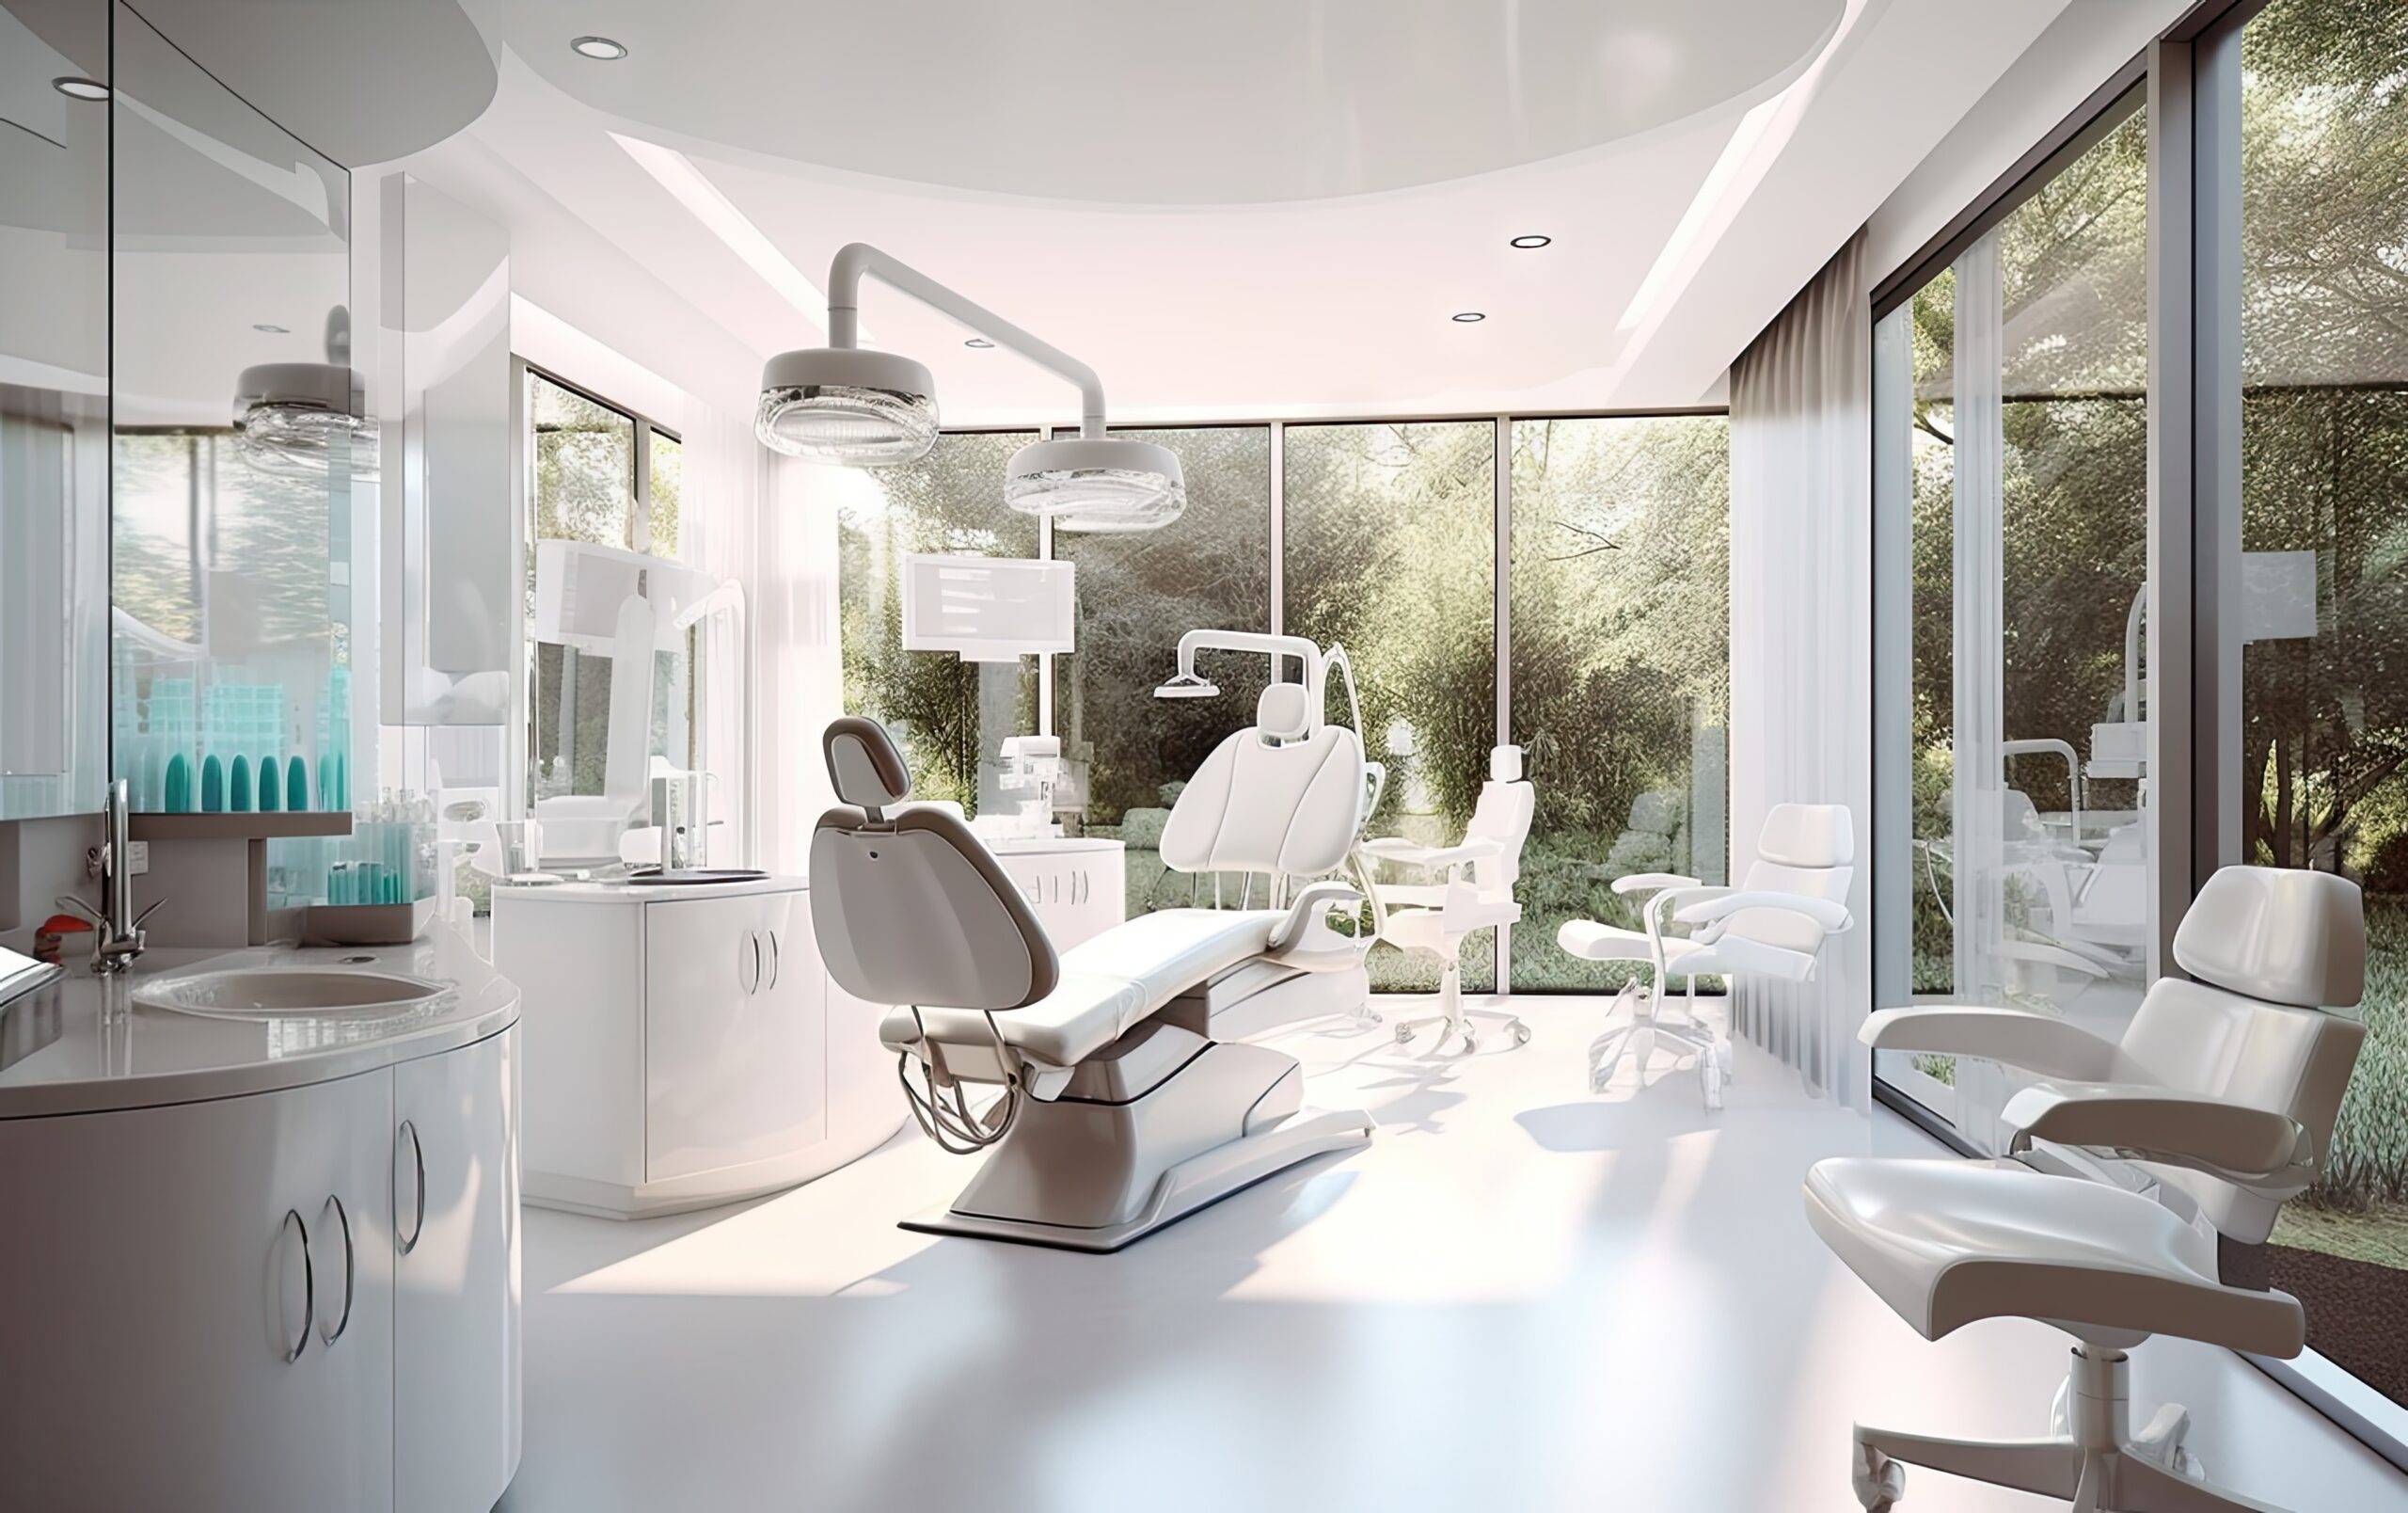 Modern dental clinic interior with nature view through large windows.